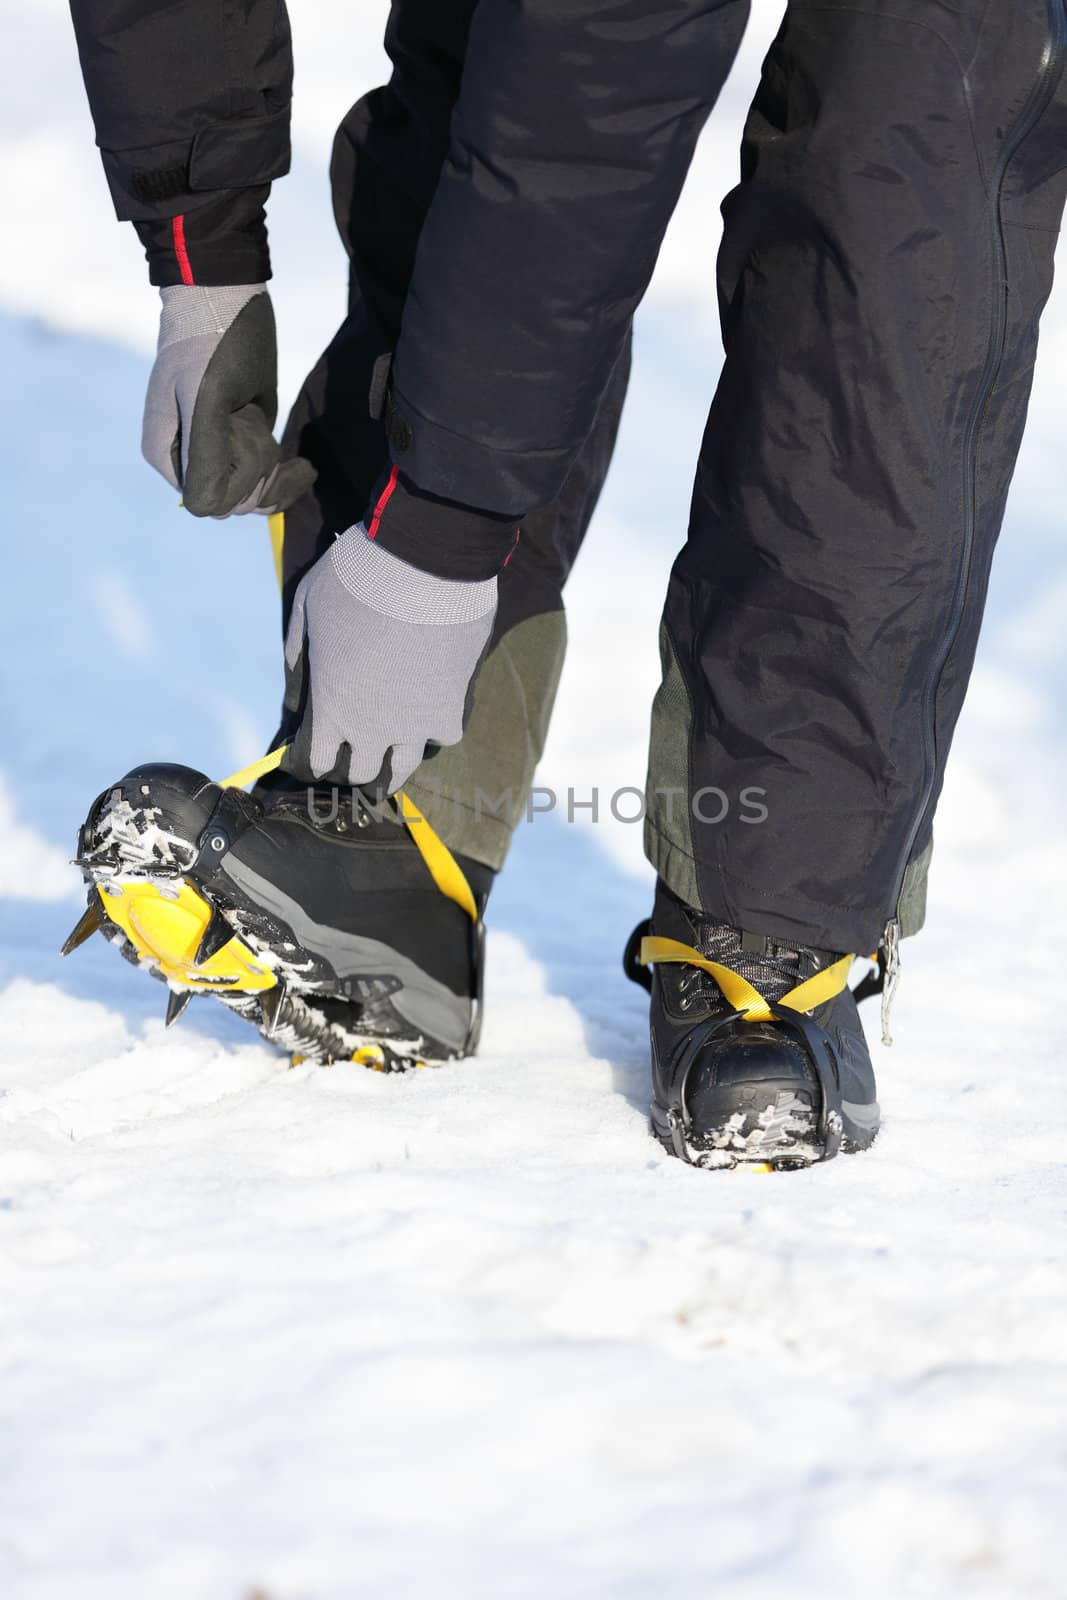 Crampons closeup. Crampons closeup. Crampon on winter boot for climbing, glacier walking or extreme hiking on ice and hard snow.